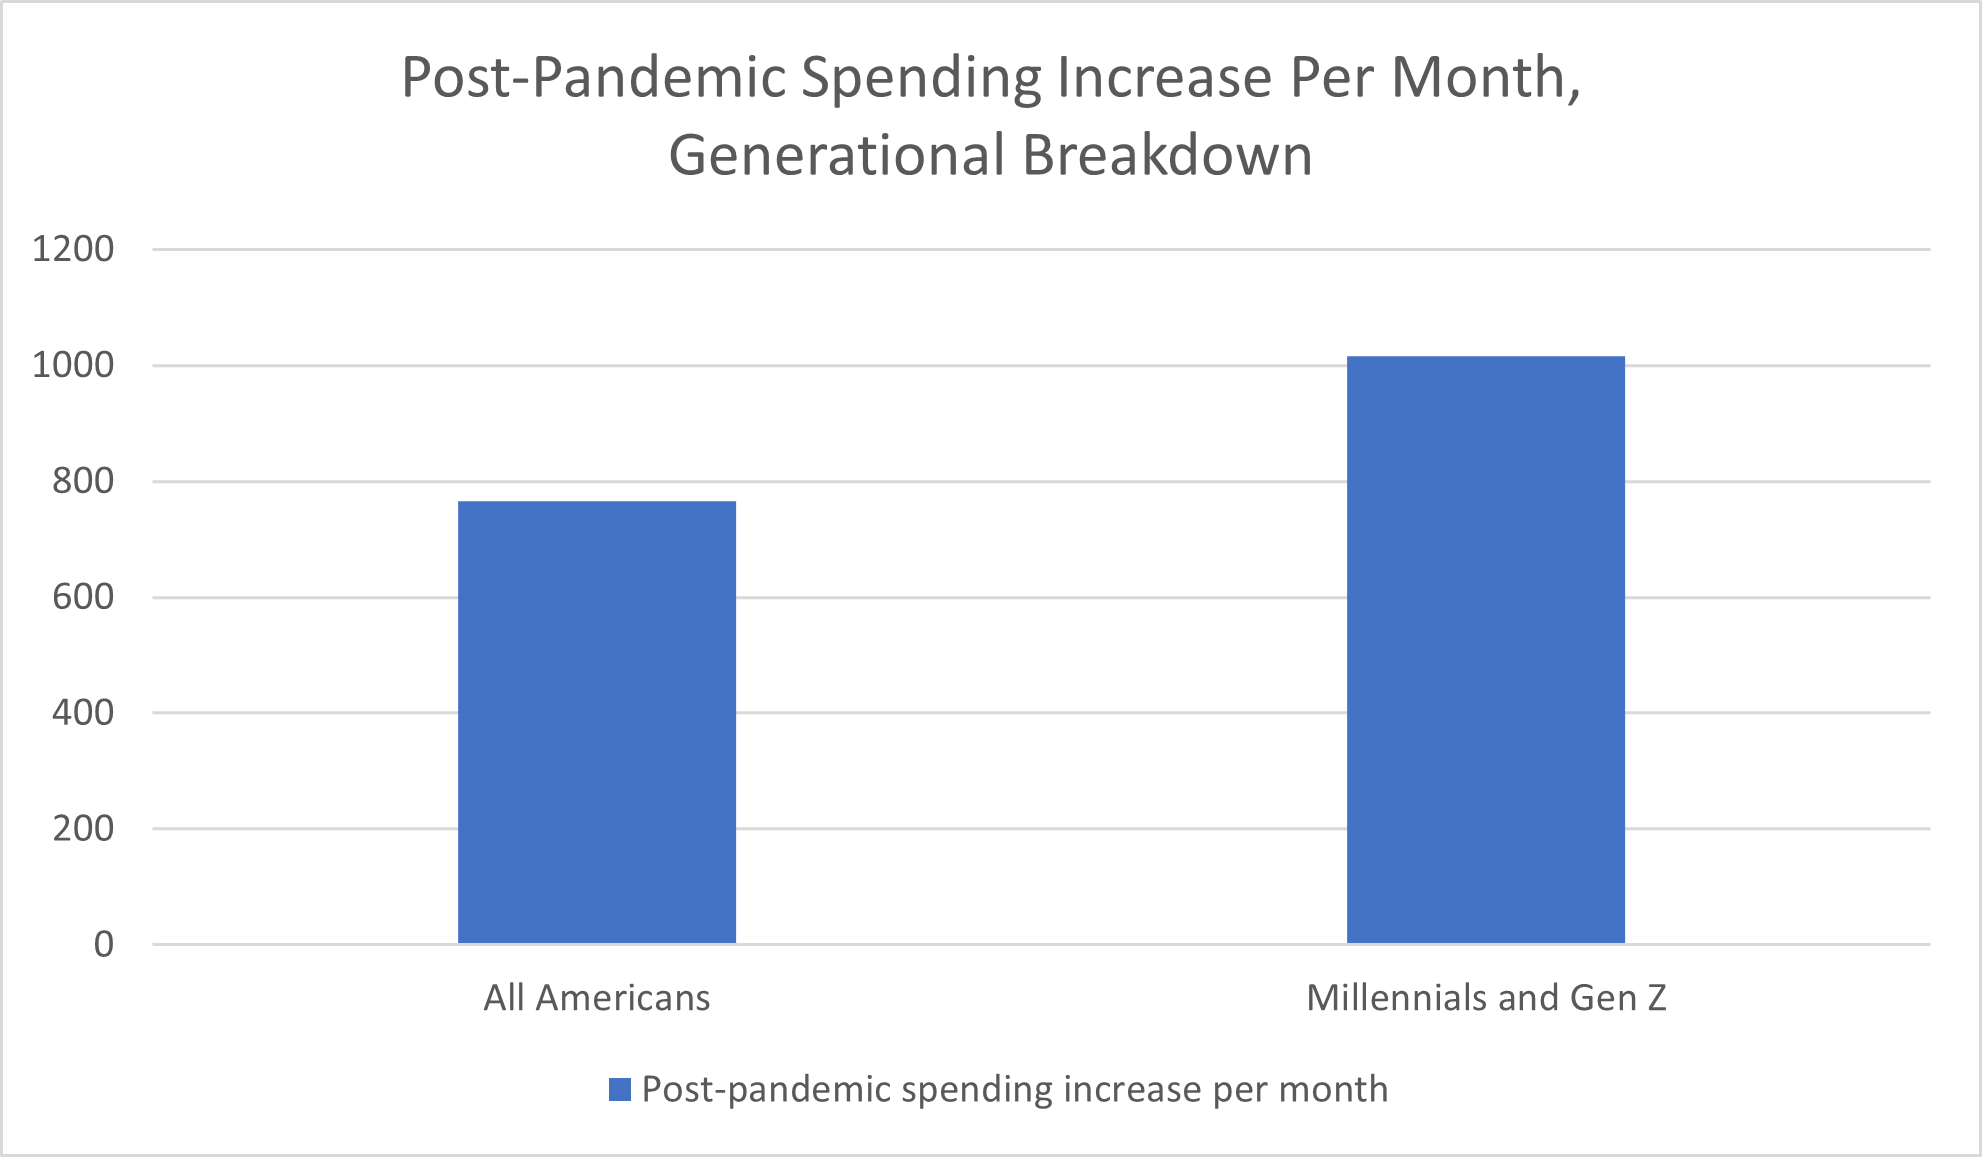 Chart comparing the post pandemic spending increase between generations